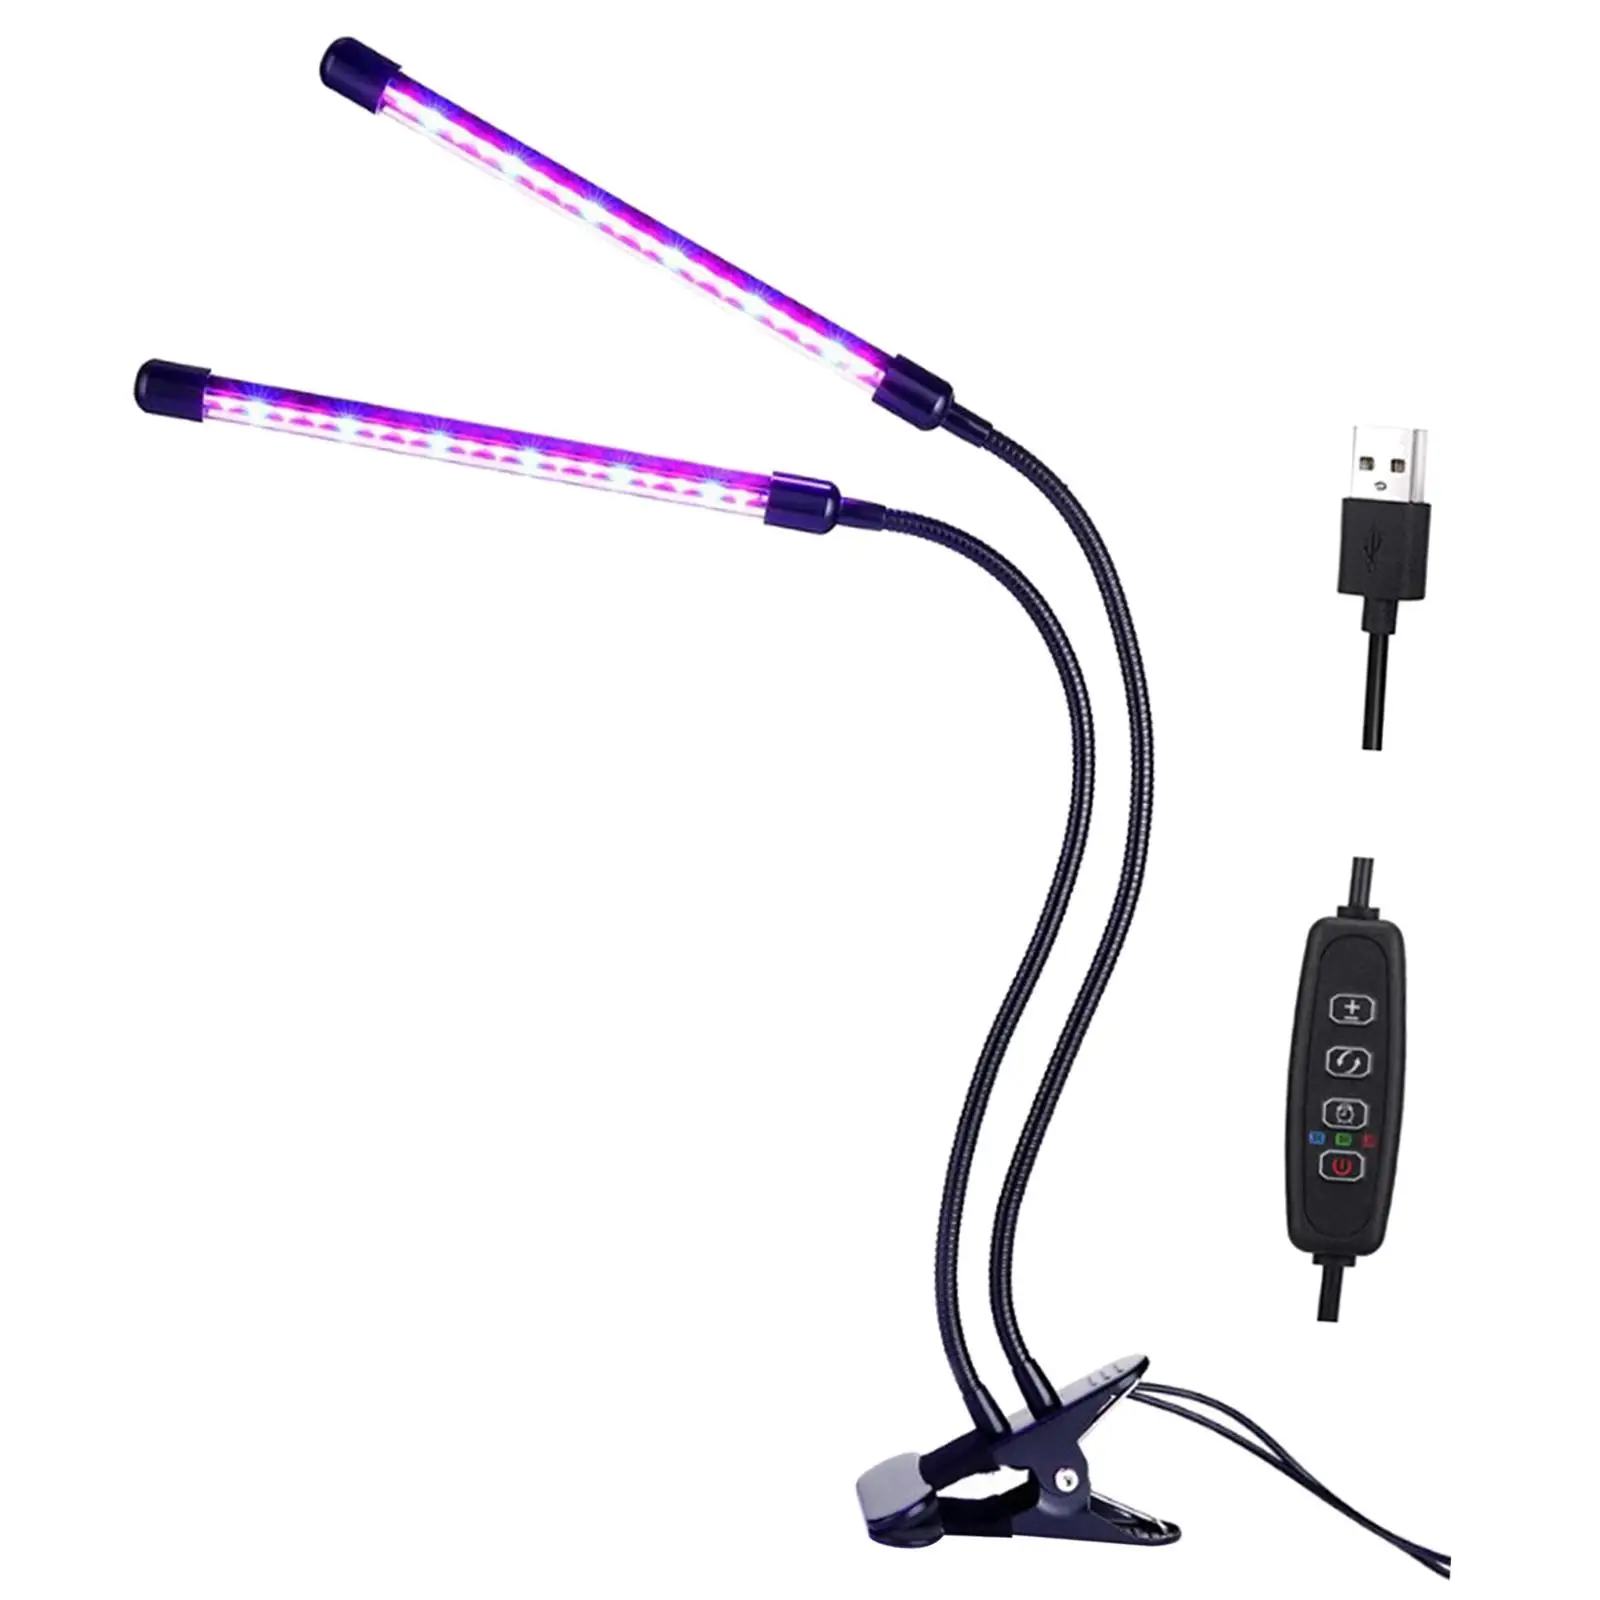 Clip Plant Growing Lamp Auto Off Timing 3 9 12Hrs LED Grow Light for Gardening Flowers Vegetable Seedling Indoor Plants